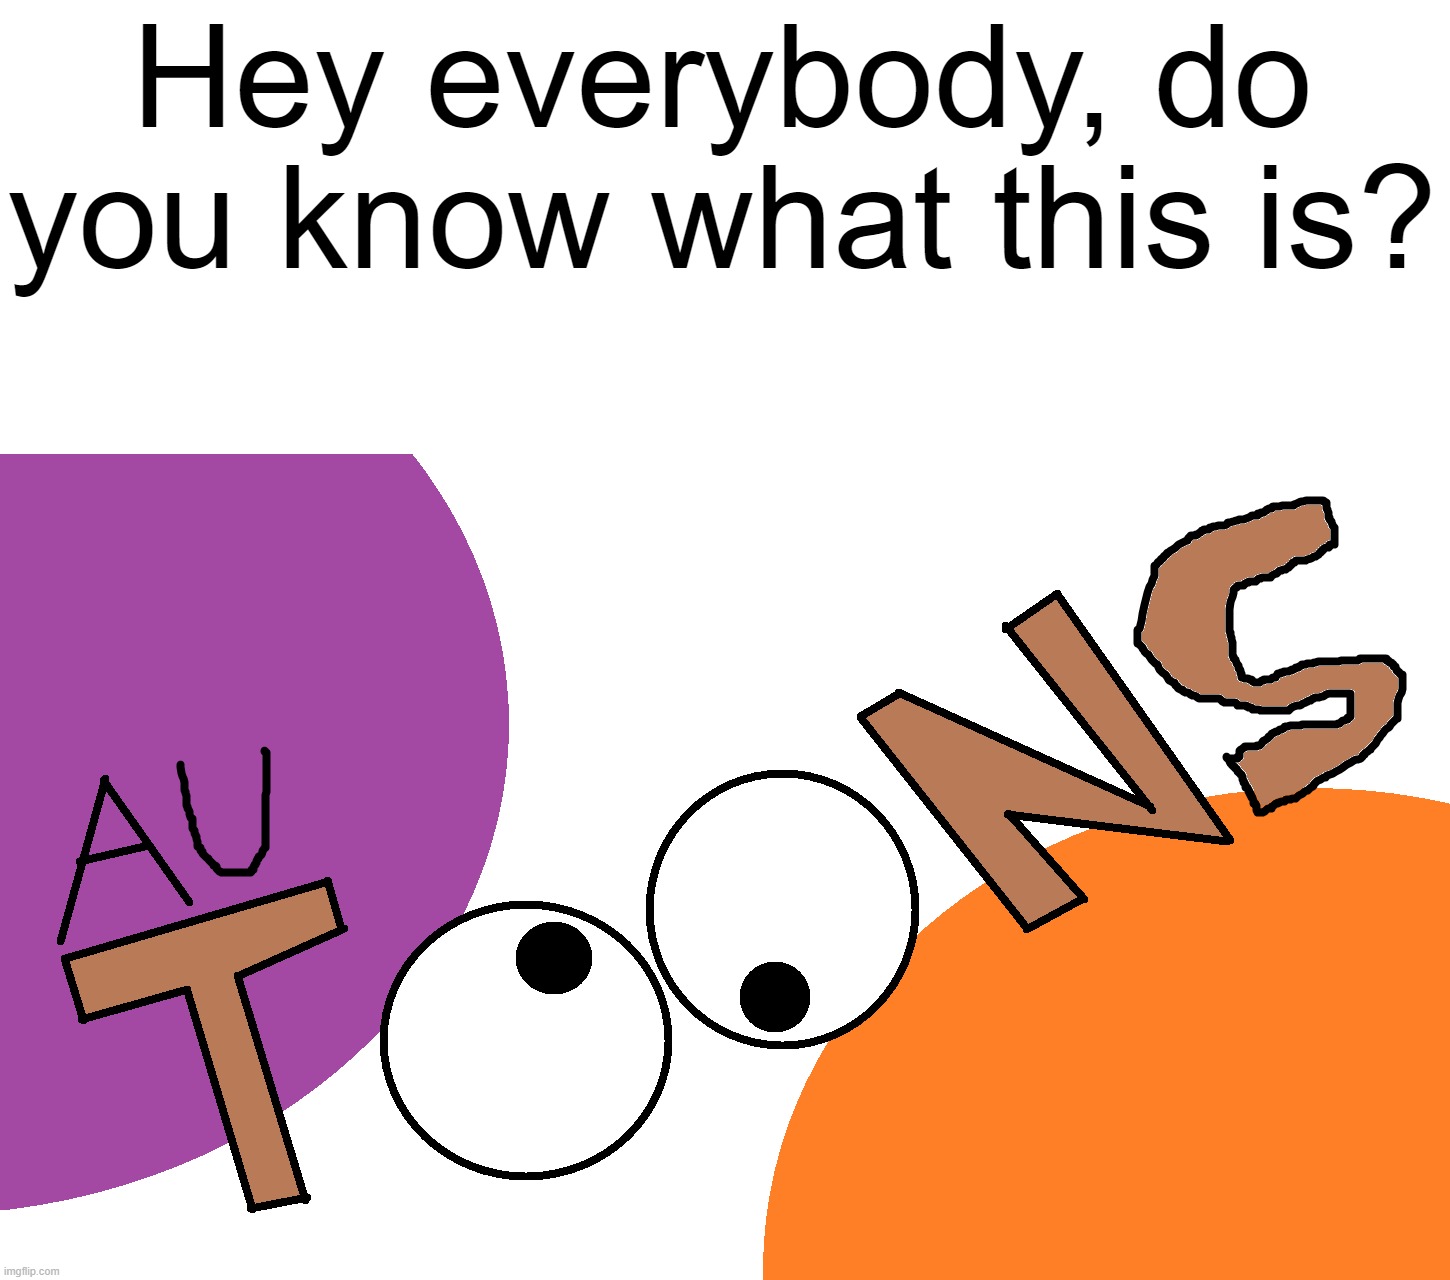 Au Toons meme | Hey everybody, do you know what this is? | image tagged in au toons,memes,funny | made w/ Imgflip meme maker